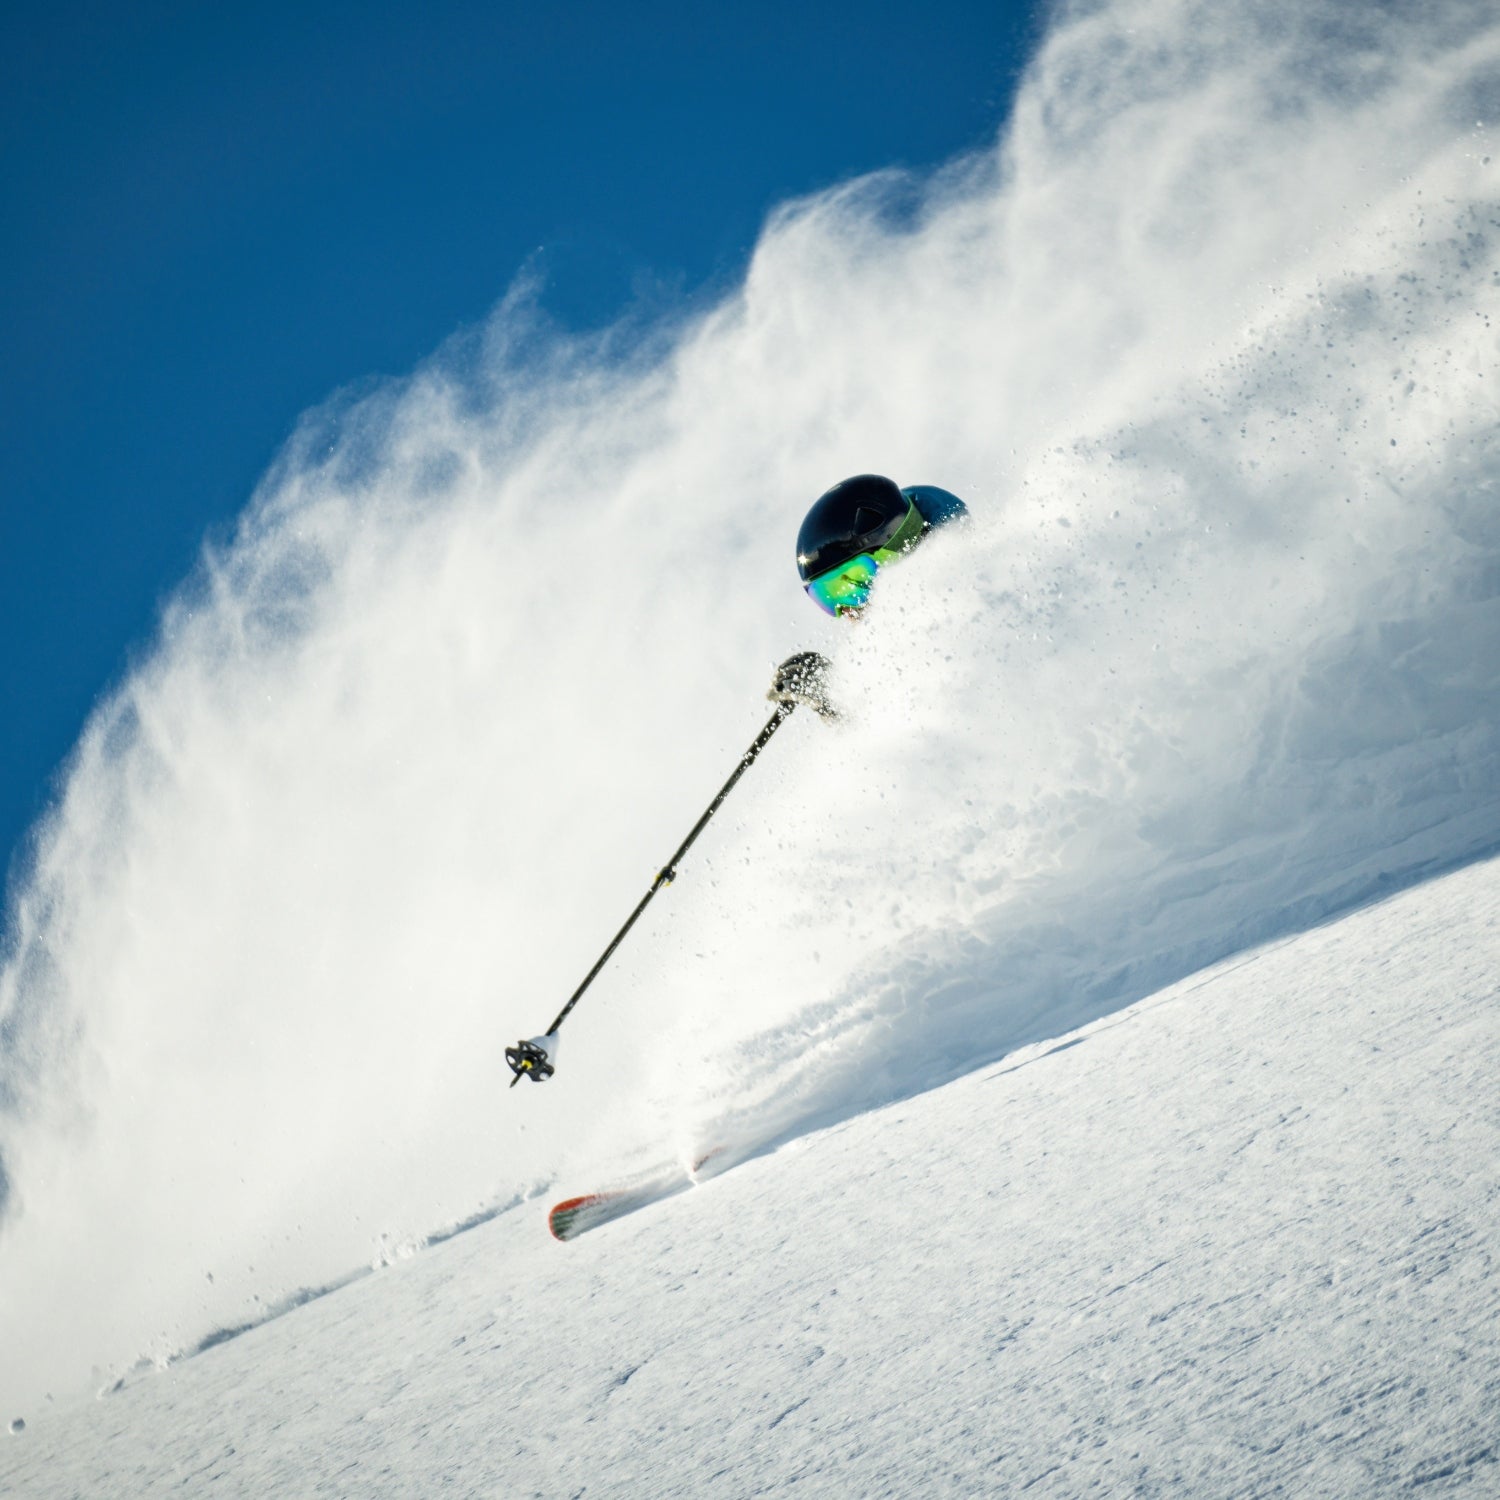 A Storm-Chasing Skier Shares How to Score Untracked Powder